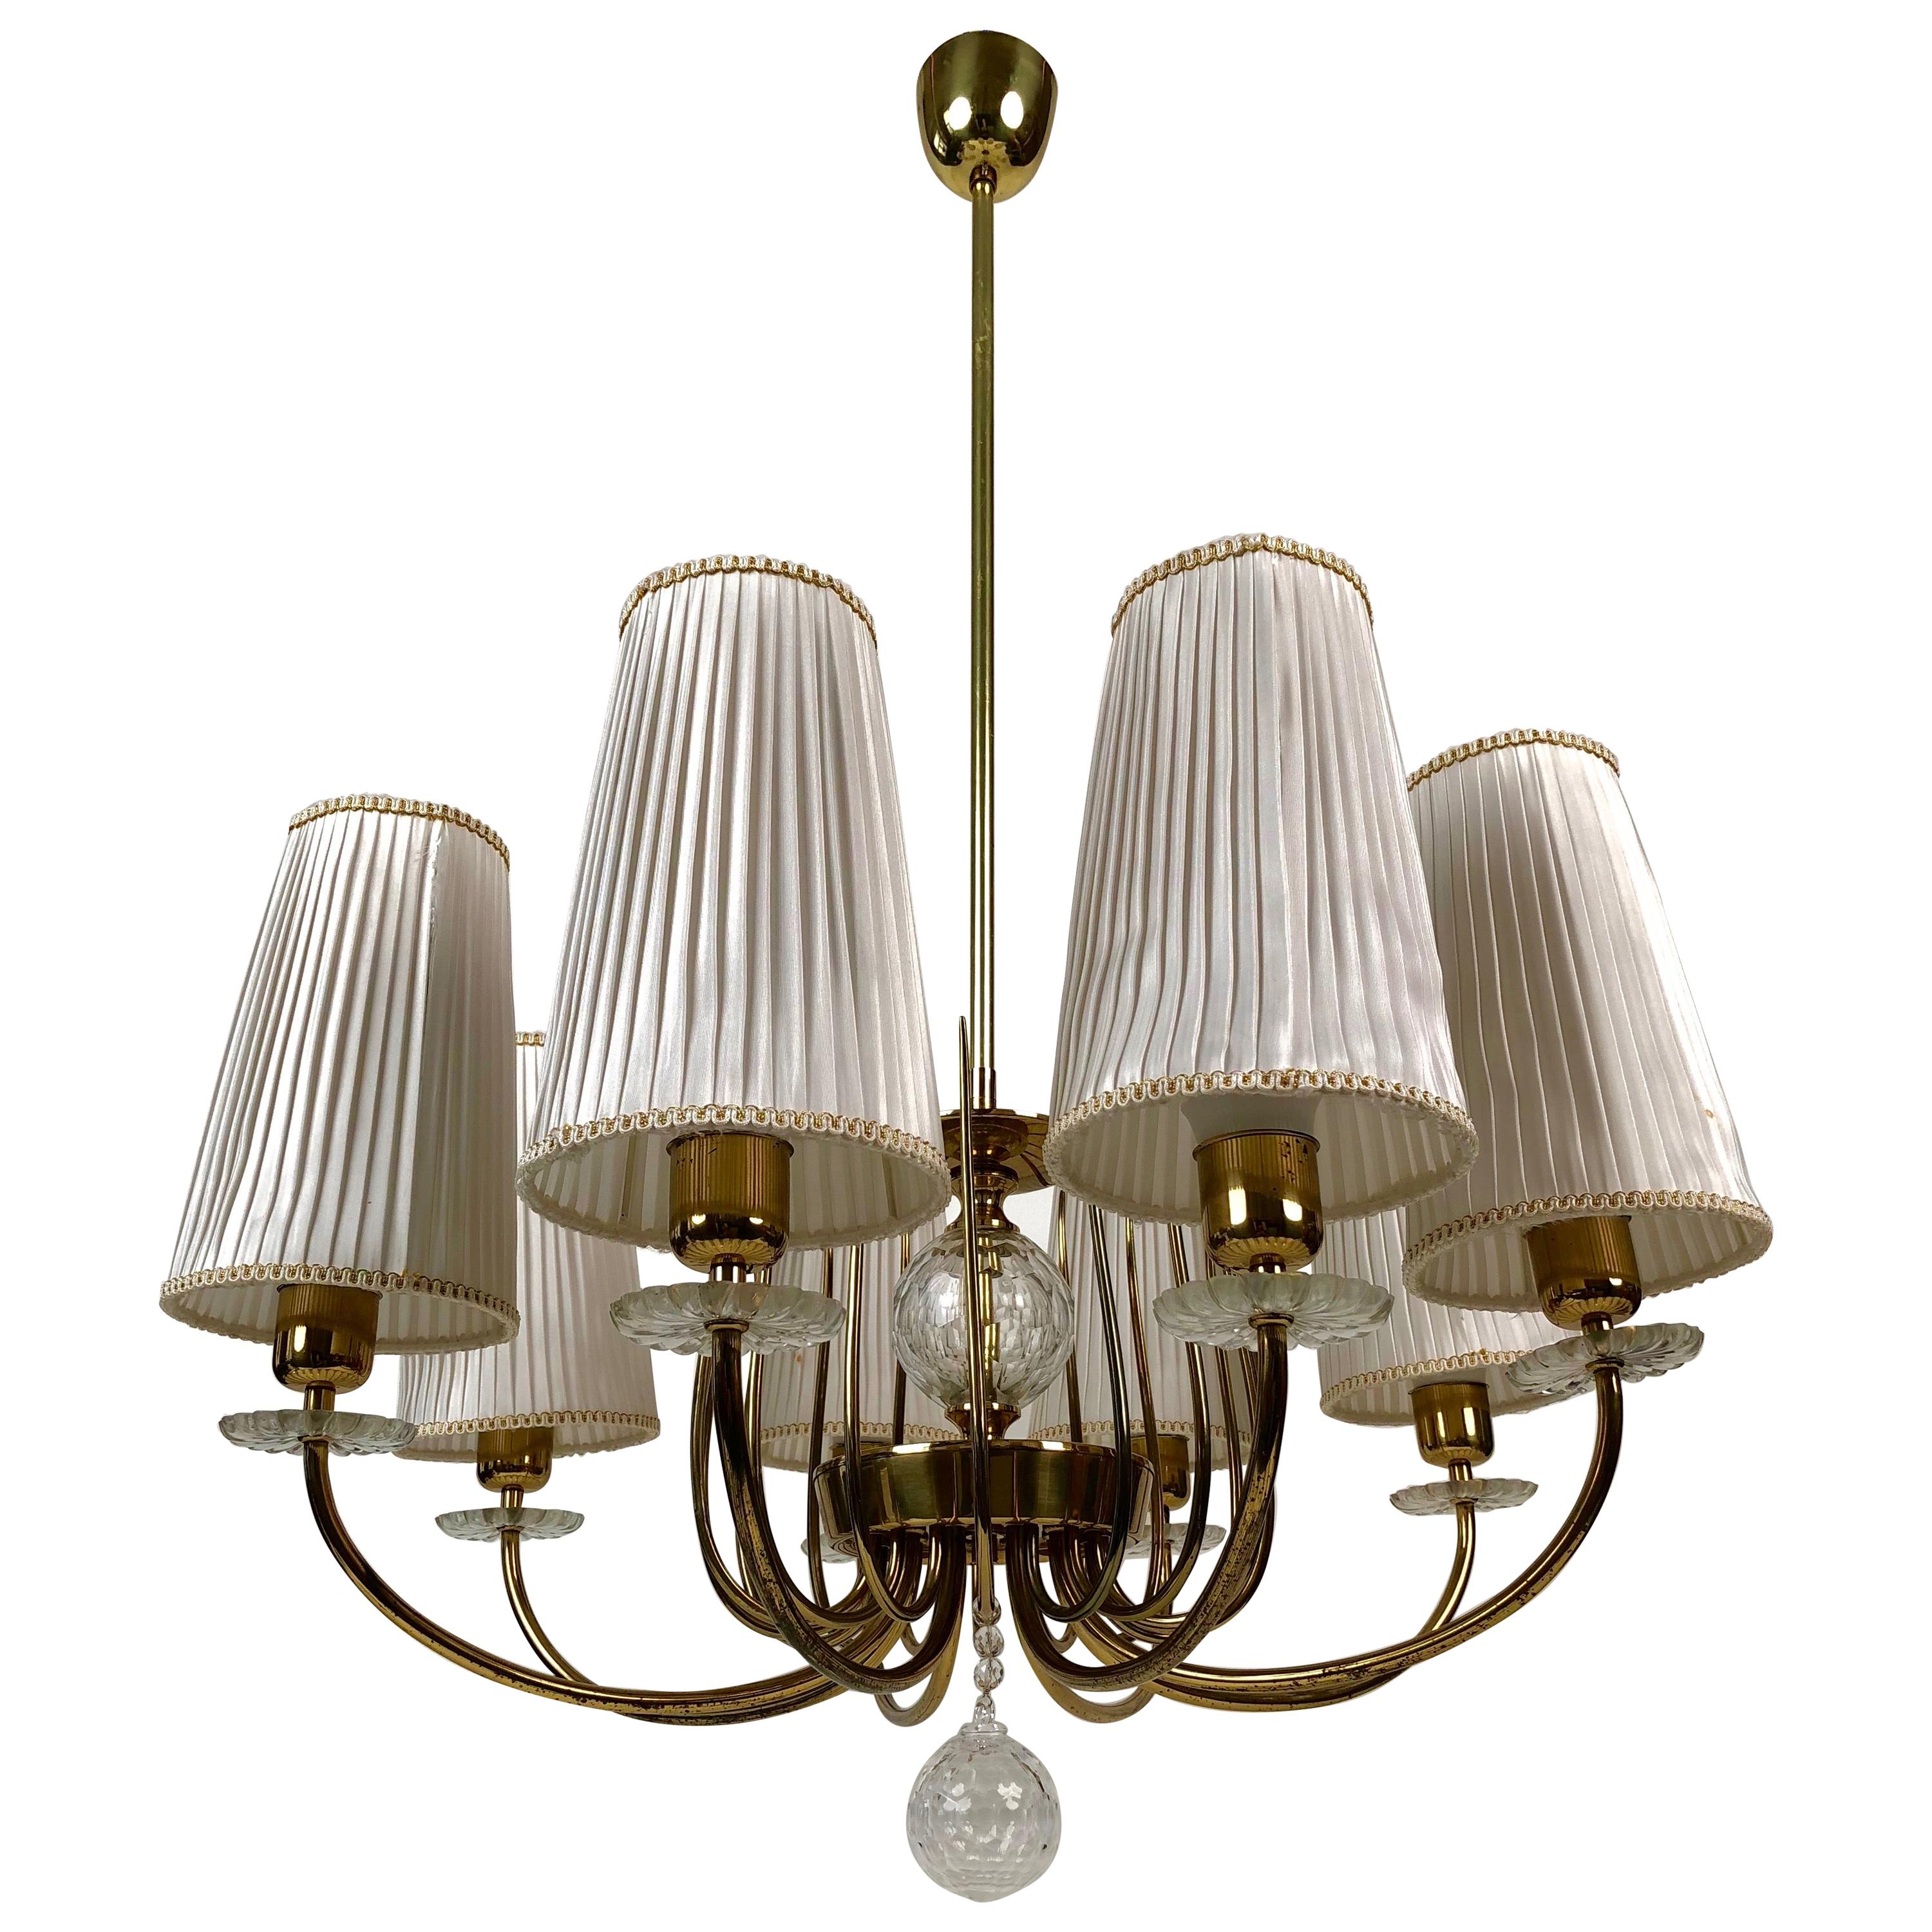 Grand Chandelier from J. L. Lobmeyr in Brass, Crystal and Silk Shades